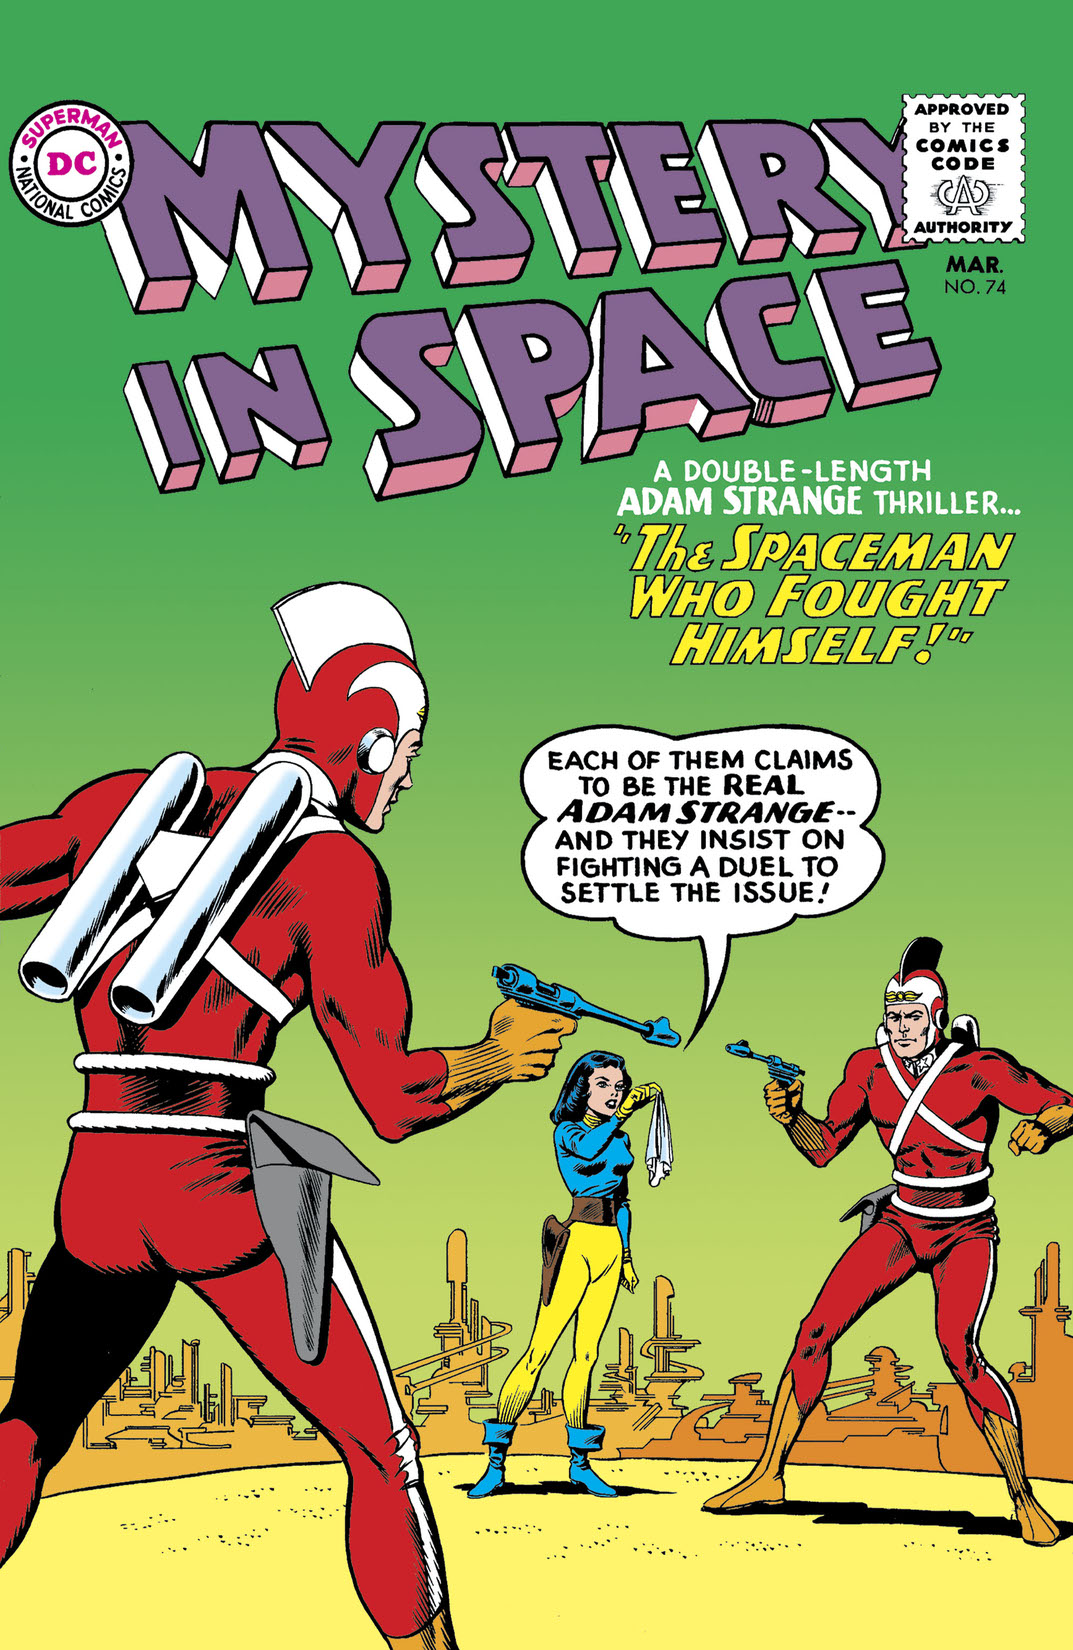 Mystery in Space (1951-) #74 preview images